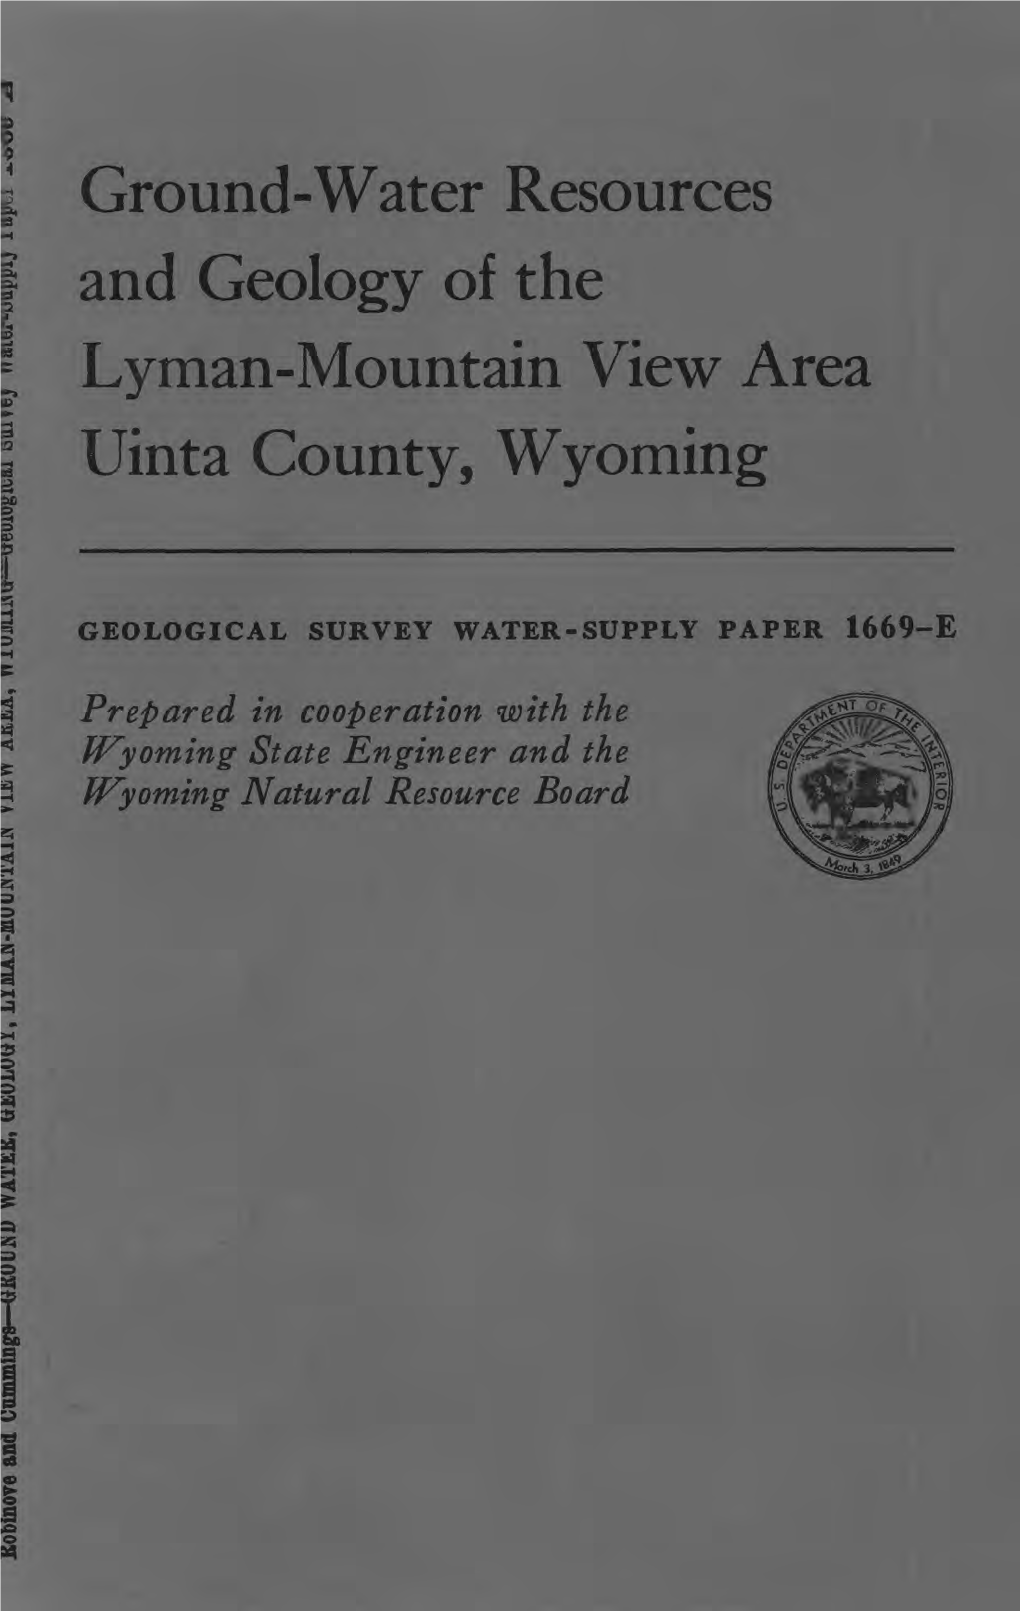 Ground-Water Resources and Geology of the Lyman-Mountain View Area Uinta County, Wyoming